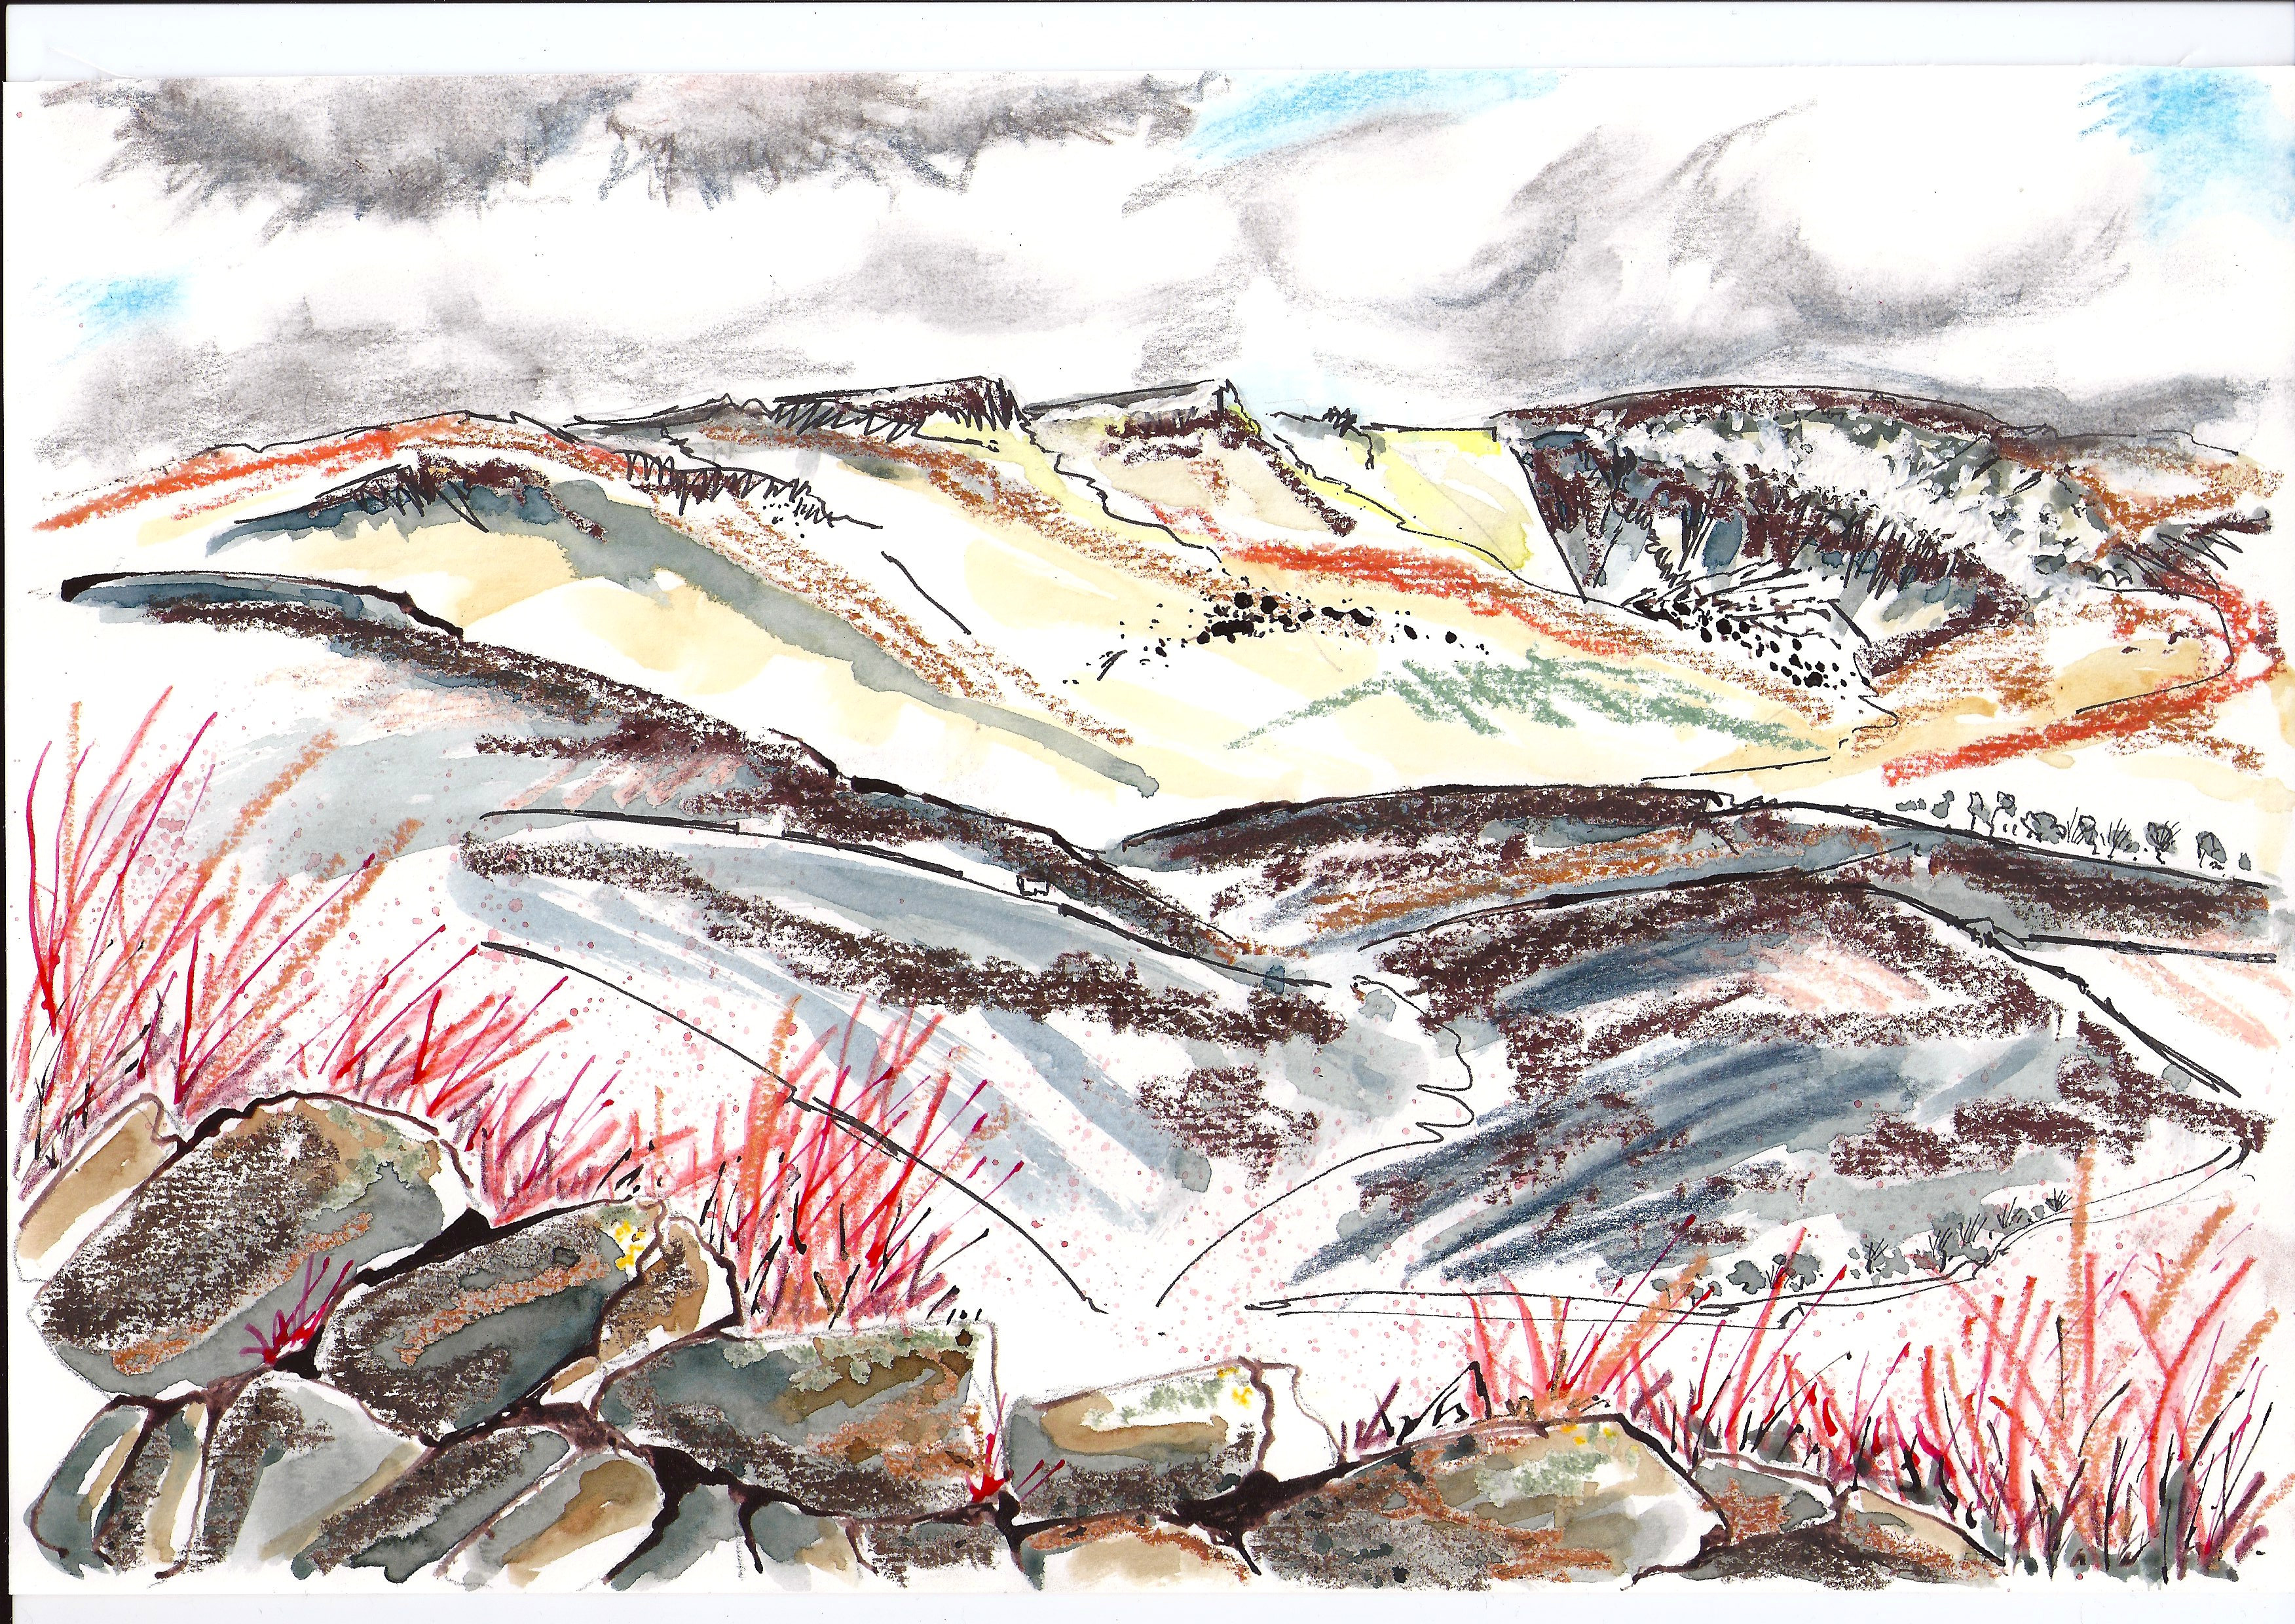 Kinder Scout painting